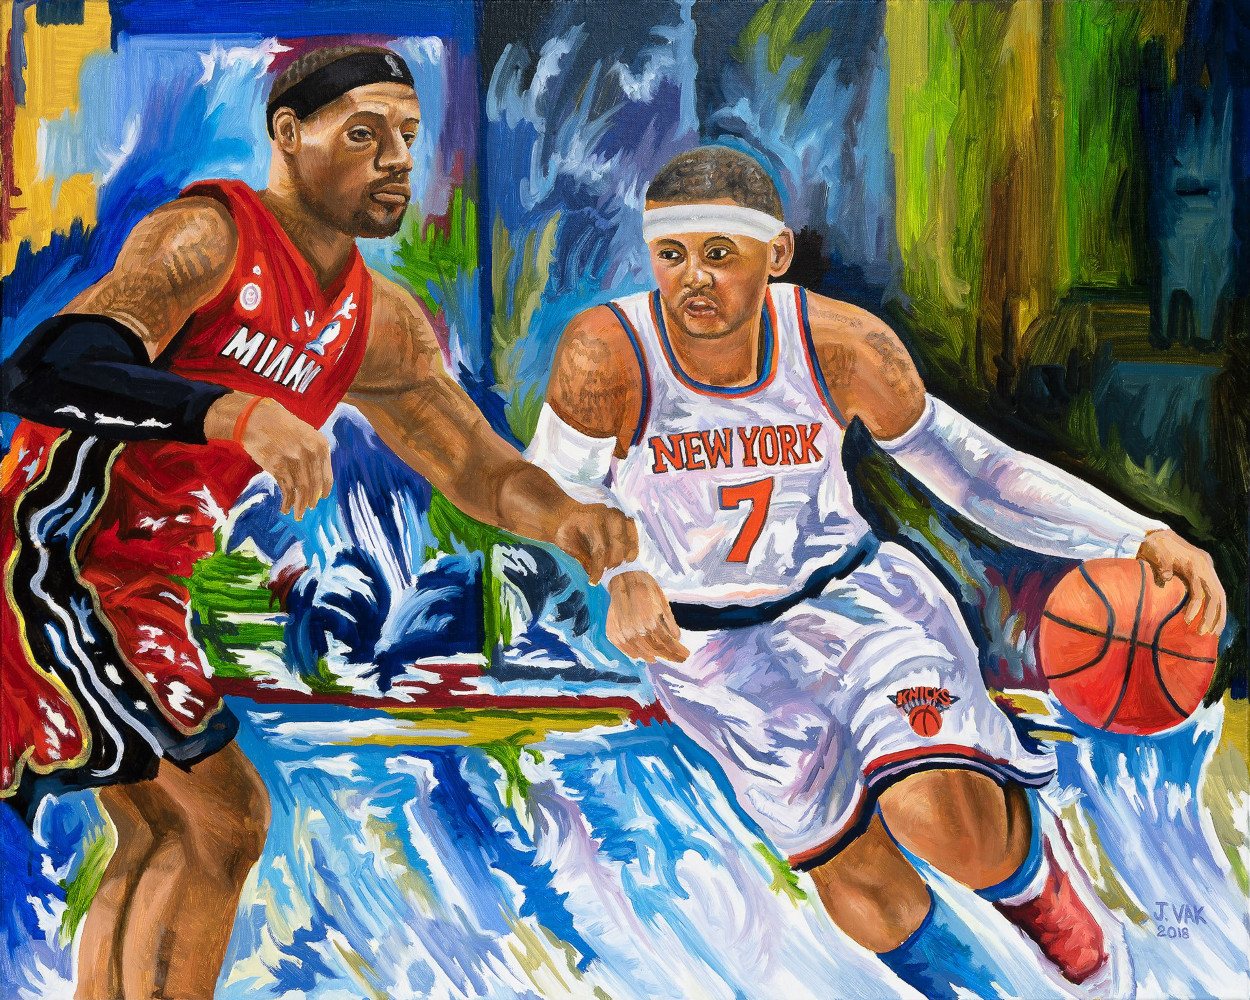 LeBron James and Carmelo Anthony
            24 X 30 Original Oil
                   $2500
                    2018